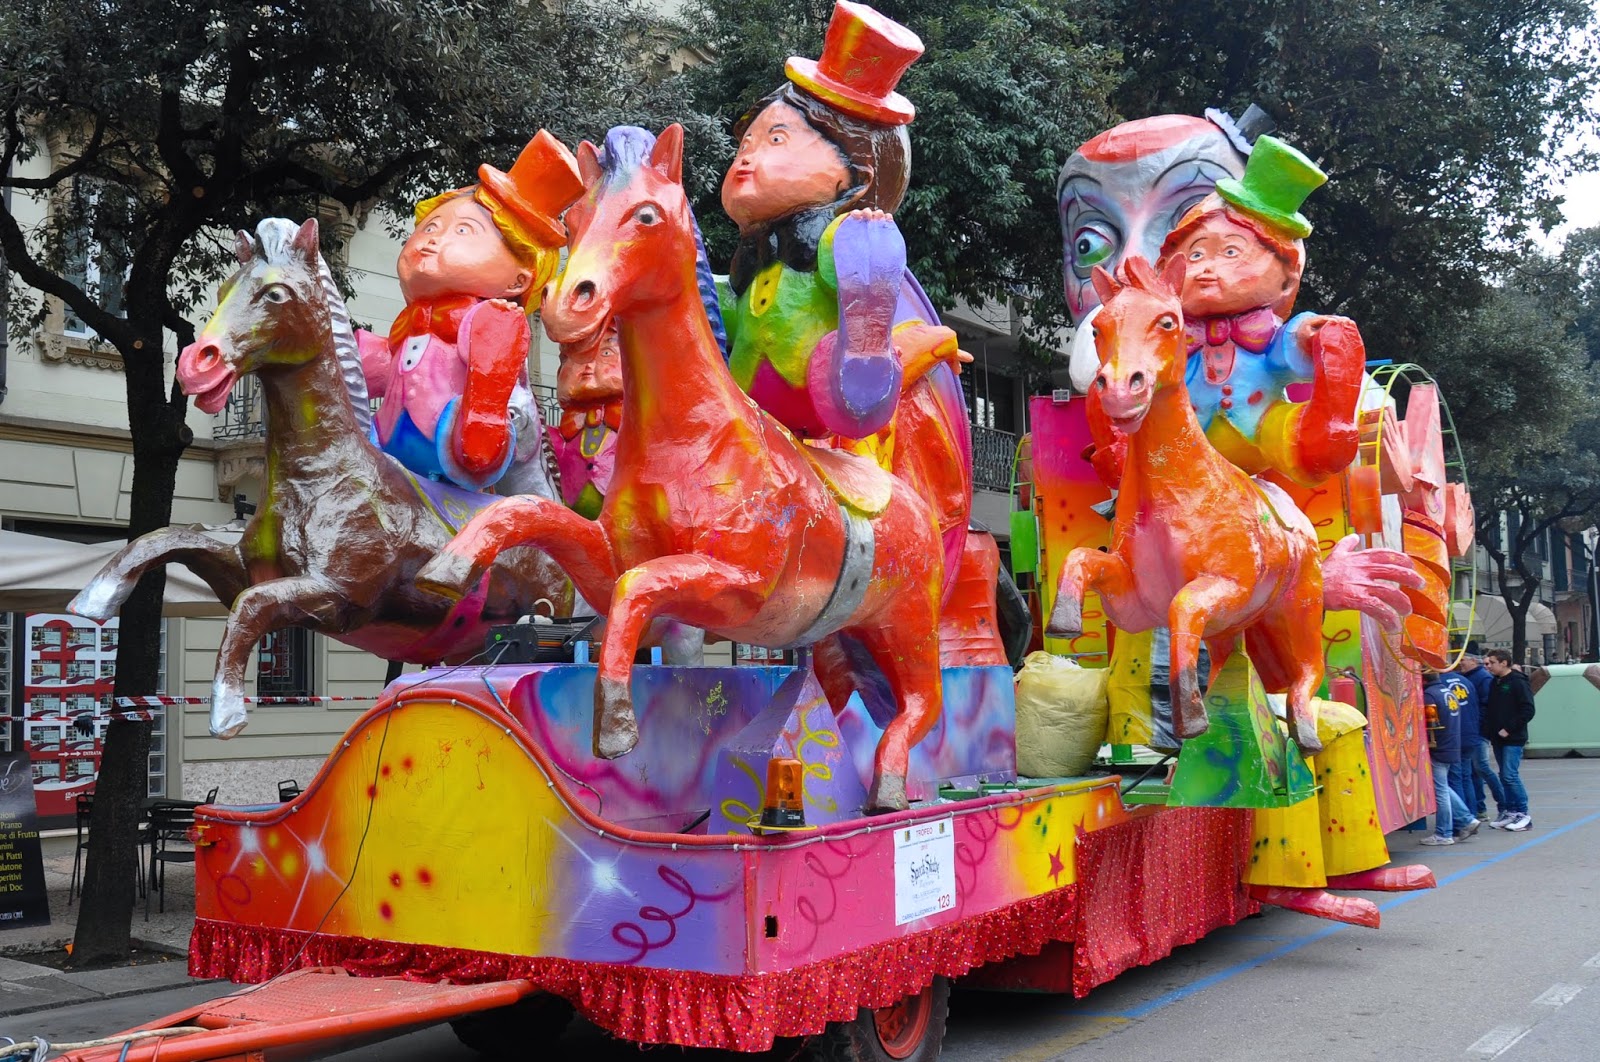 A bright float waiting for the parade for Verona's main Carnival event - Venerdi Gnocolar - to start